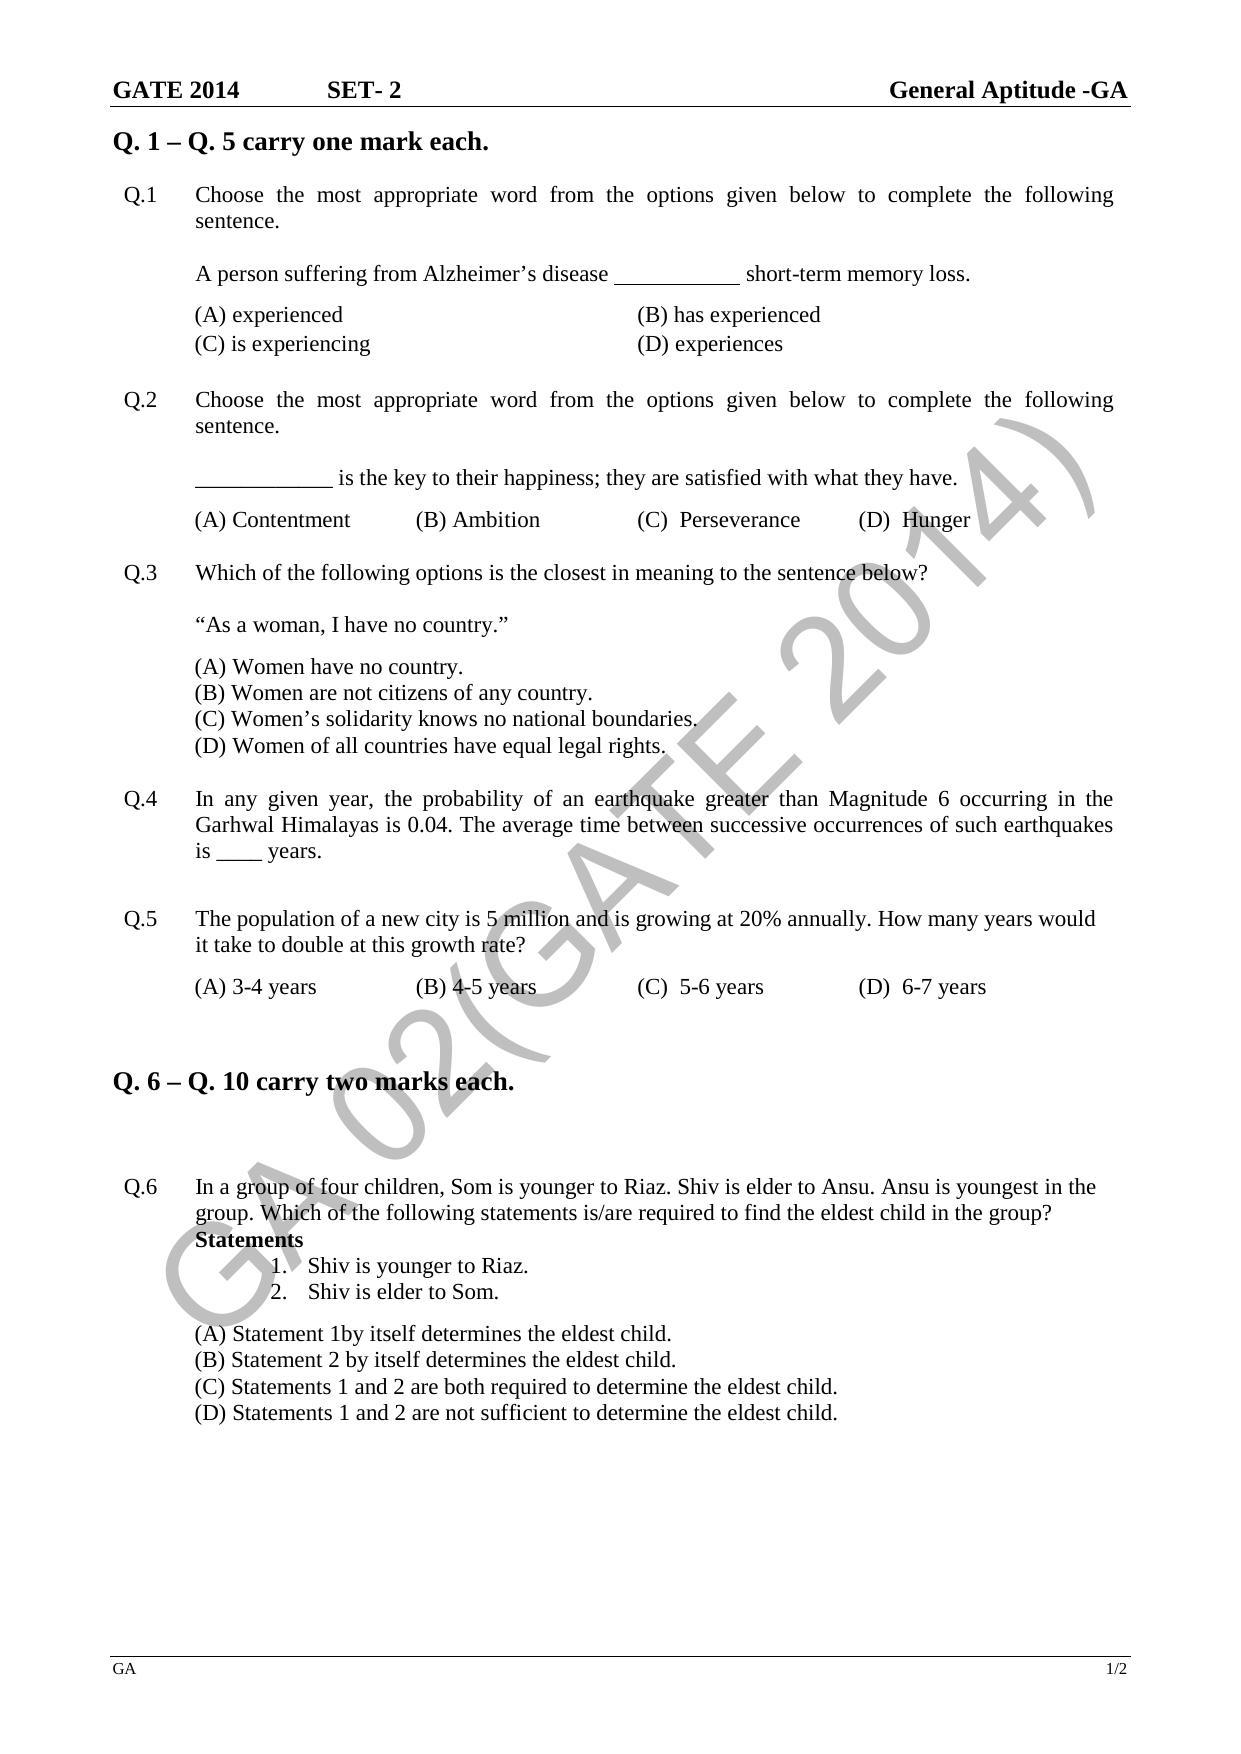 GATE 2014 Biotechnology (BT) Question Paper with Answer Key - Page 5